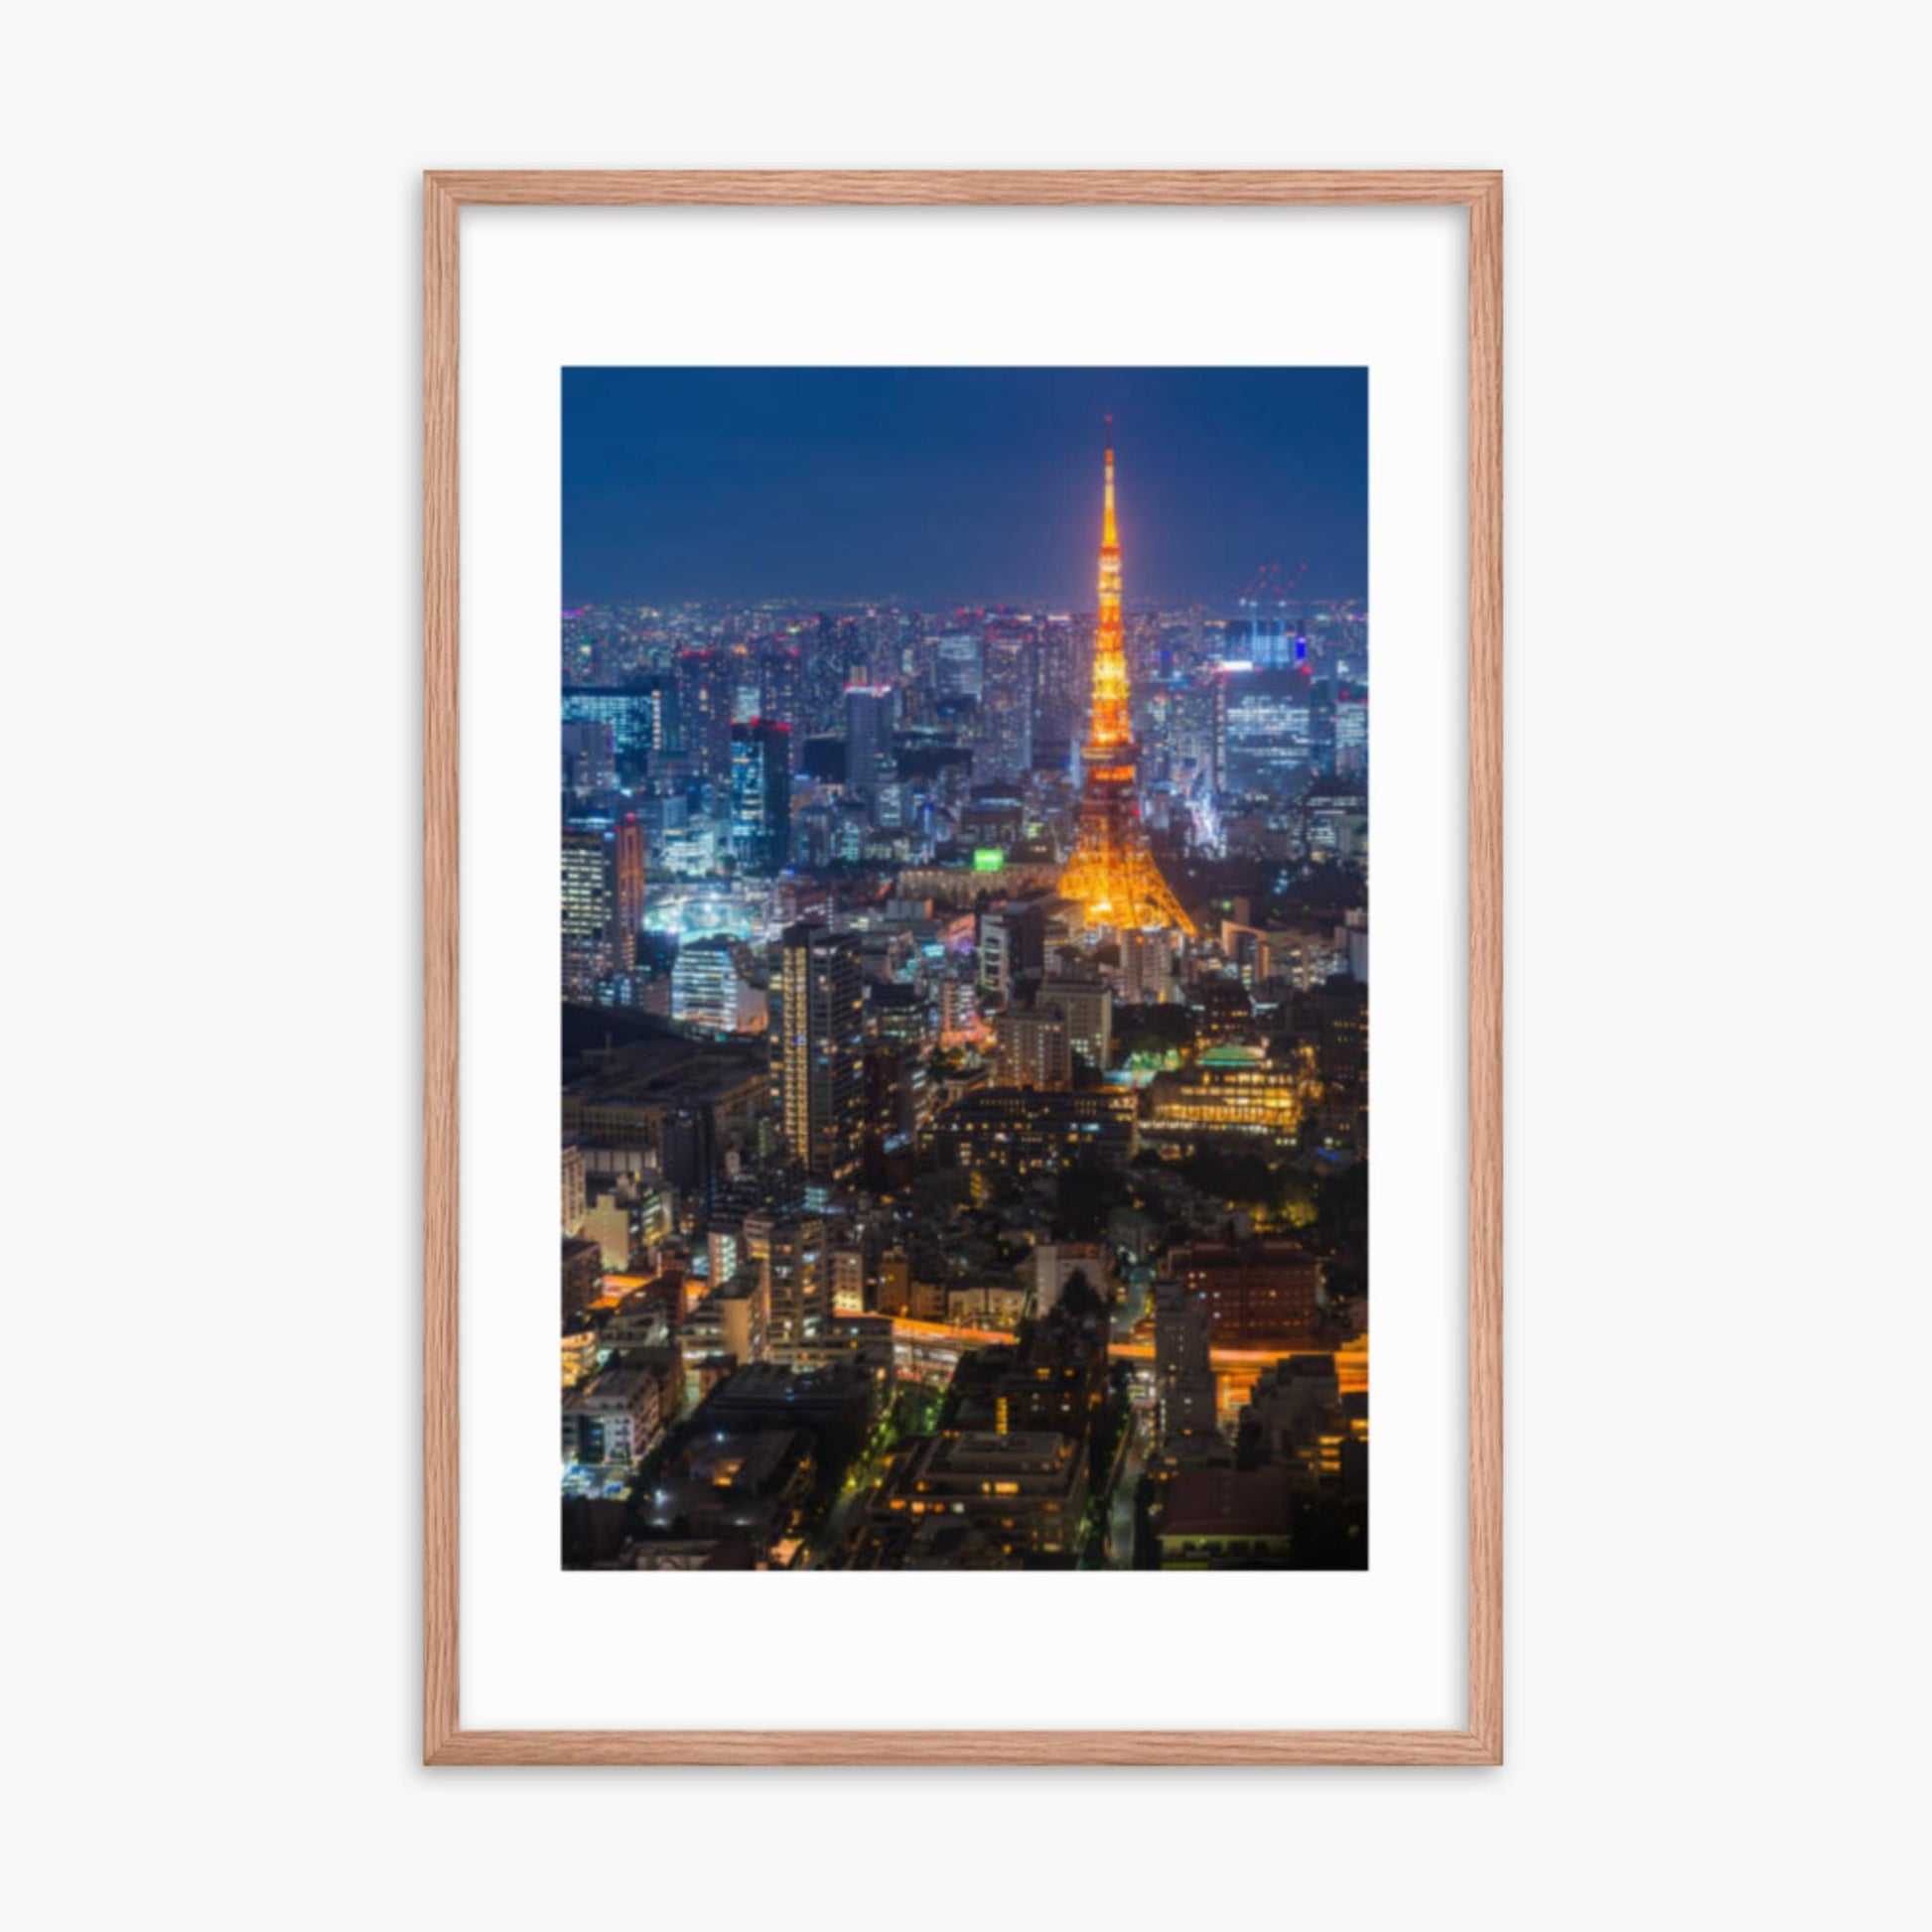 Tokyo Tower illuminated 24x36 in Poster With Oak Frame